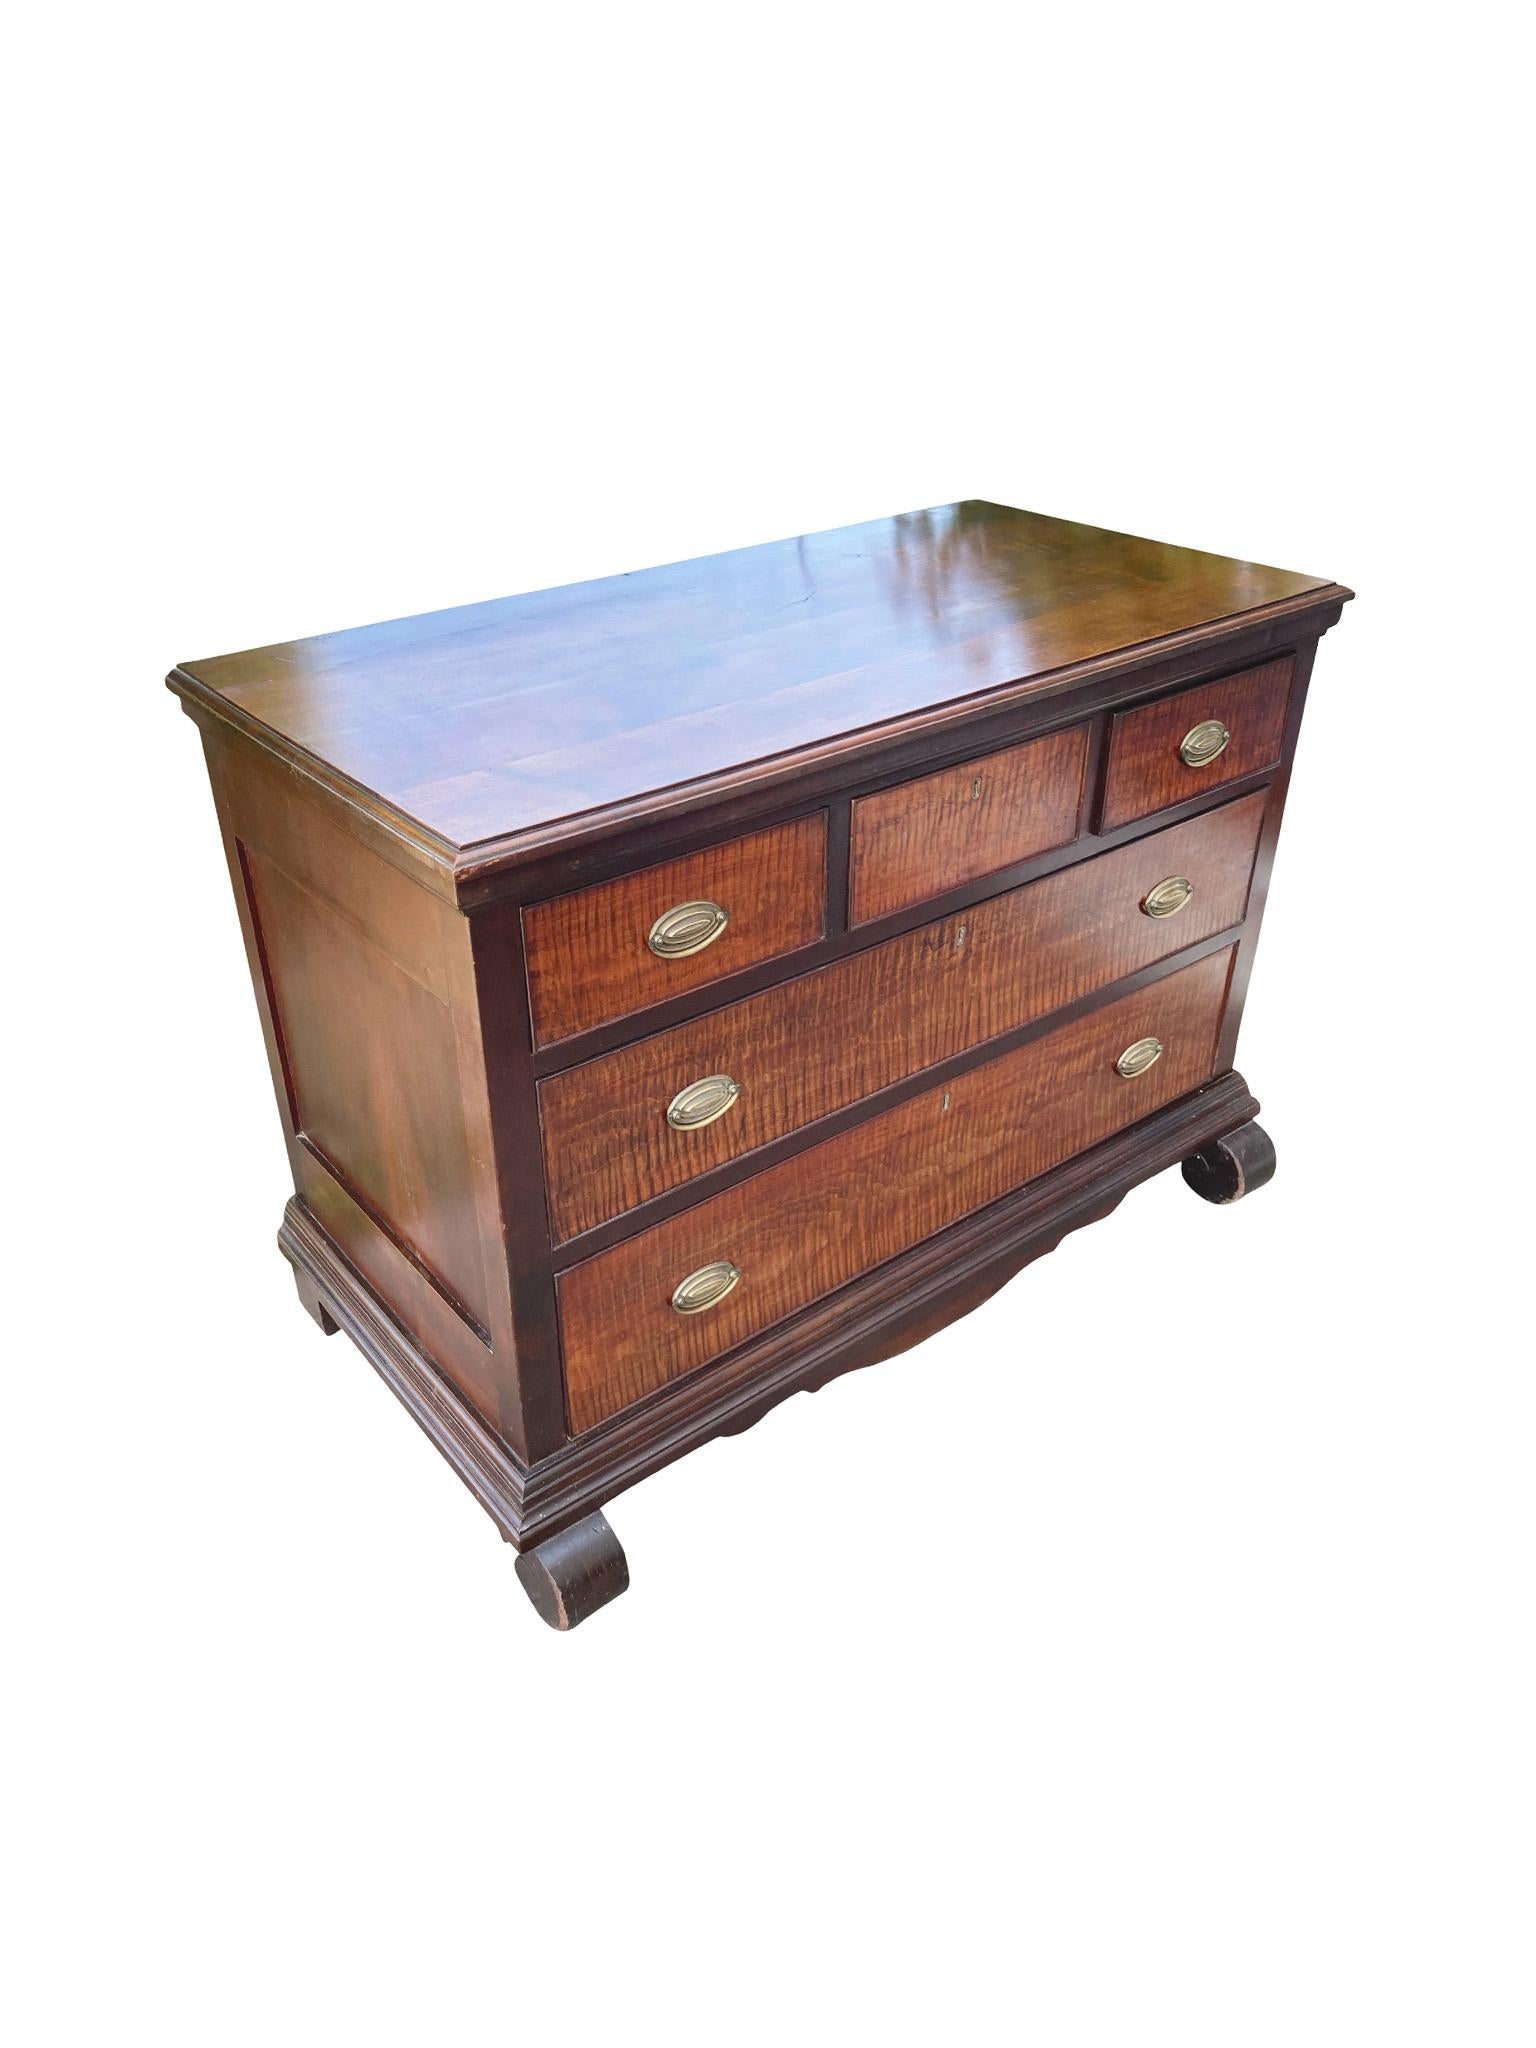 We love the organic and warm features of this American Classical bureau. Hand-crafted in the mid-19th century, it's comprised of mahogany with tiger maple fronts. There are three small top drawers and two full length bottom drawers. The brass pulls